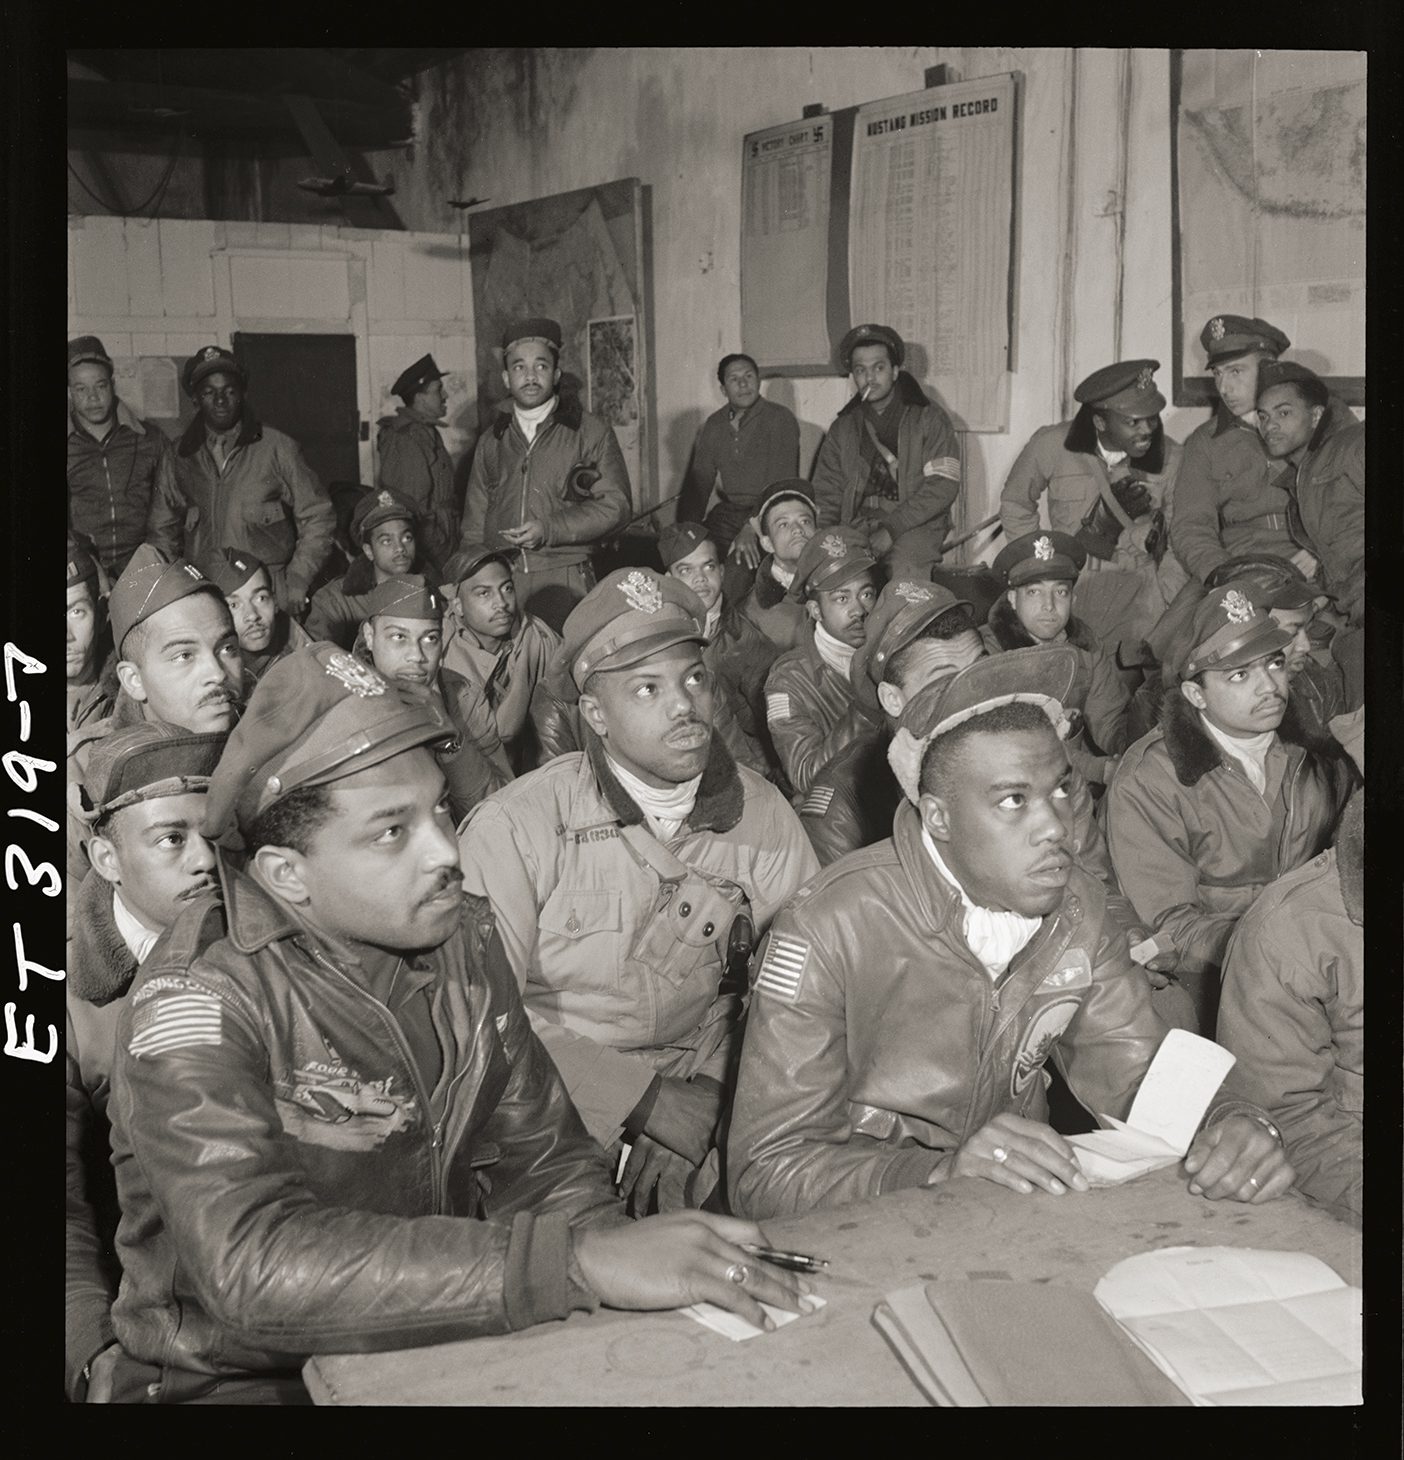 A sepia photo of a gathering of the Tuskegee Airmen.